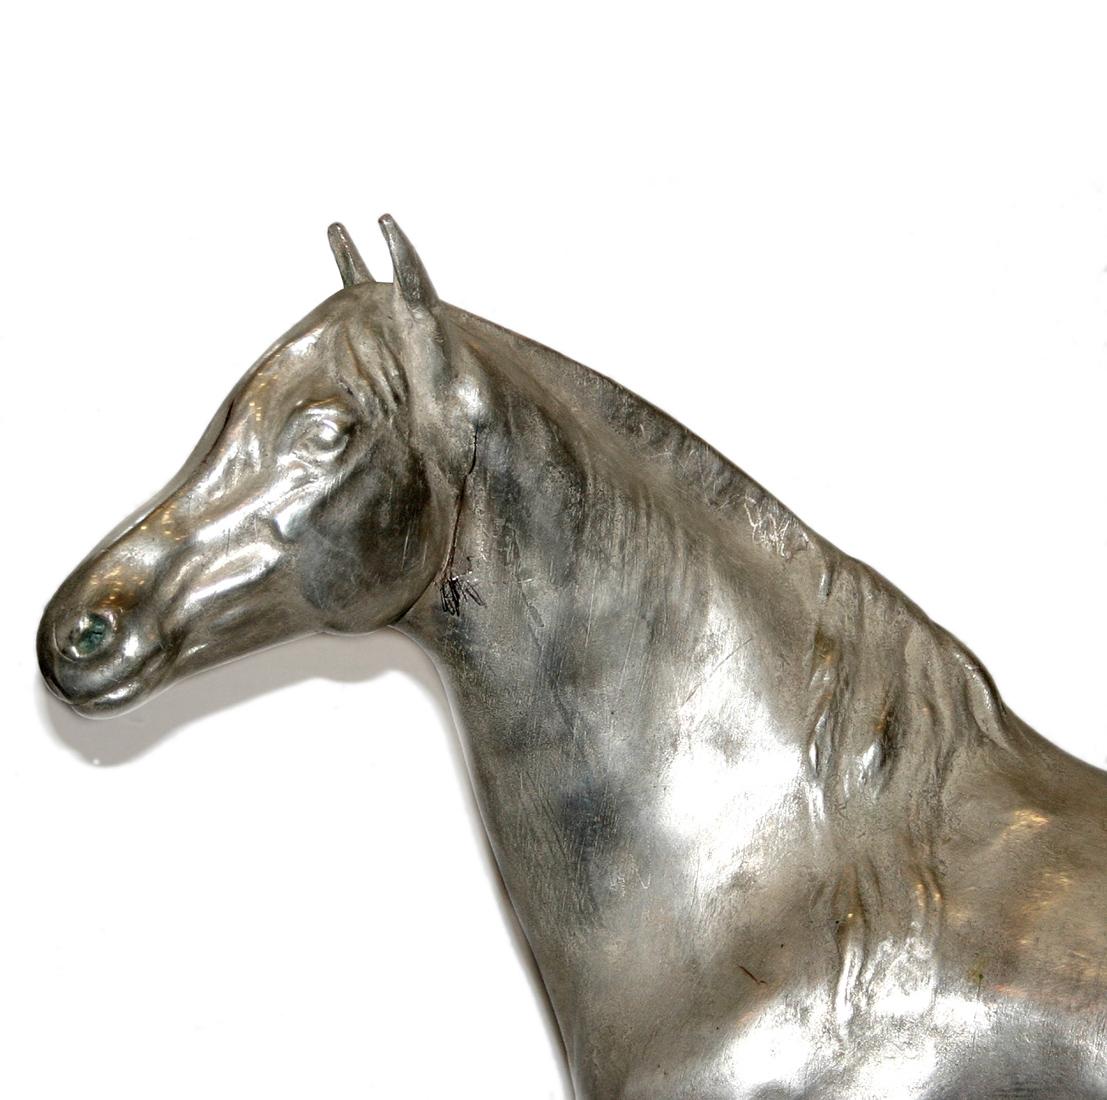 A circa 1900 English silver plated horse sculpture.

Measurements:
Height: 23